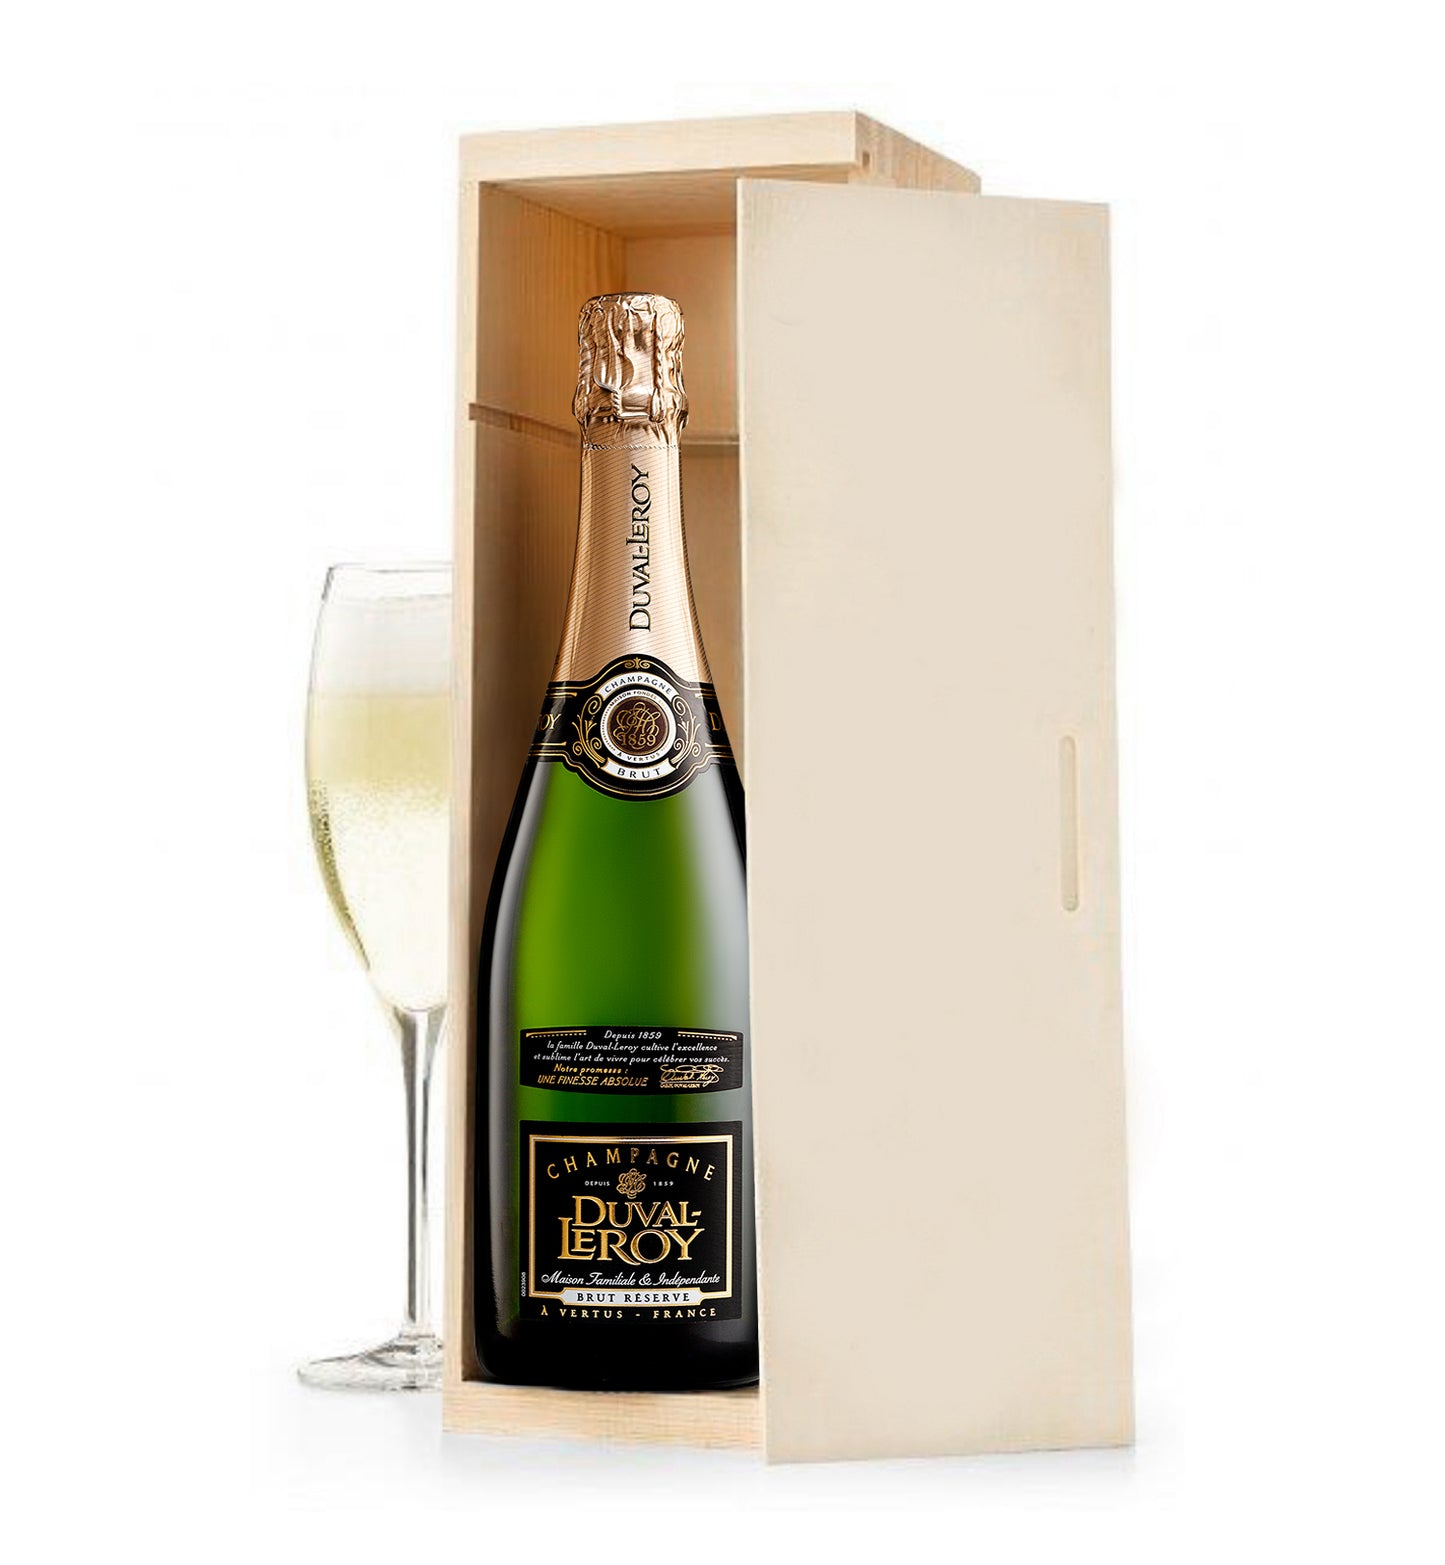 Duval Leroy Champagne Brut Reserve Crate